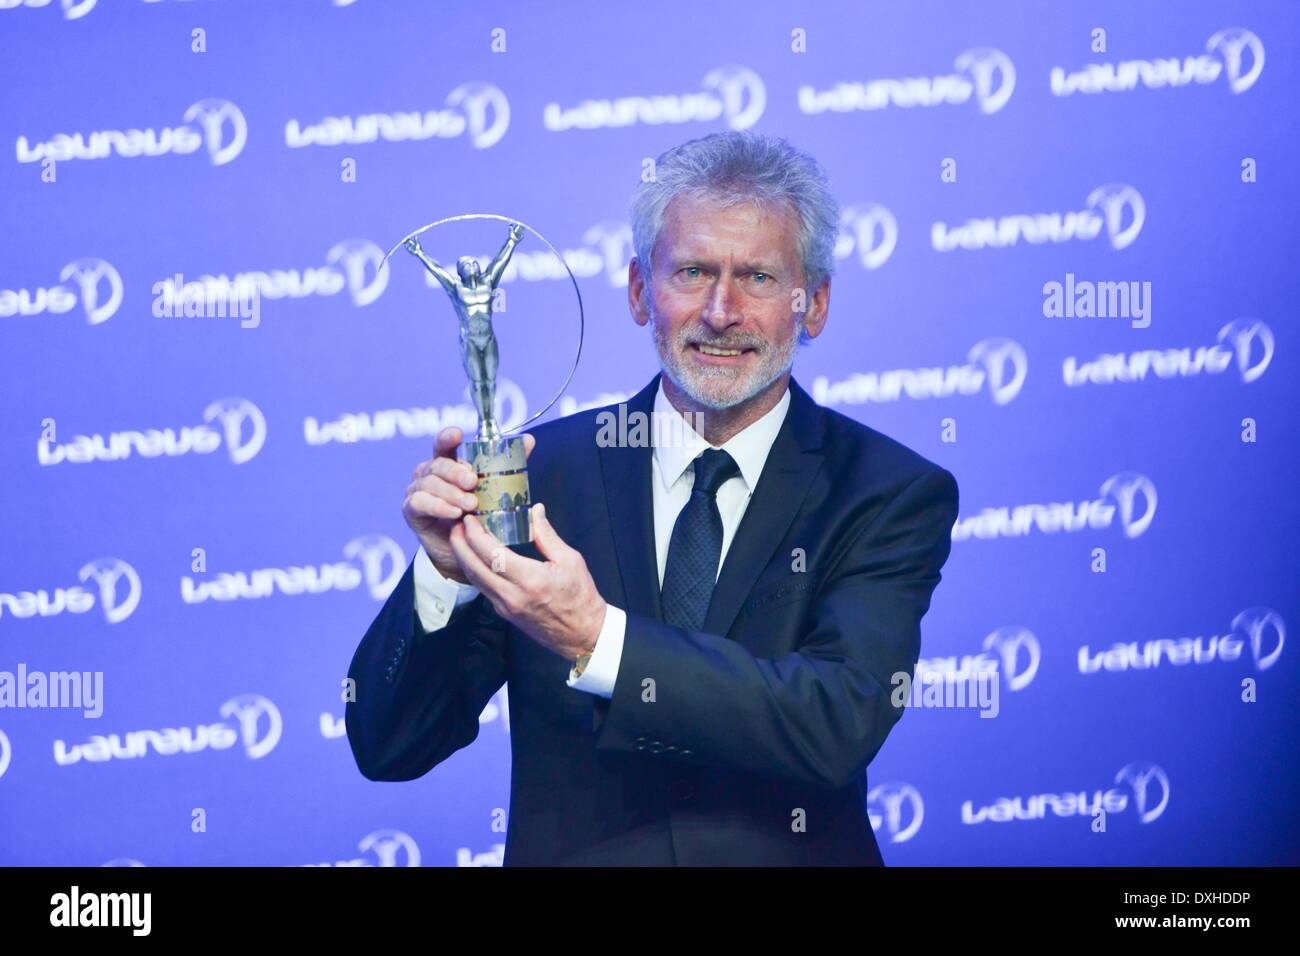 Kuala Lumpur. 26th Mar, 2014. Former football star Paul Breitner poses with the trophy for Team of the Year during the Laureus World Sports Awards ceremony on March 26, 2014, in Kuala Lumpur, Malaysia. Team Bayern Munich has been awarded as Team of the Year at the Laureus World Sports Awards ceremony. Credit:  Chong Voonchung/Xinhua/Alamy Live News Stock Photo